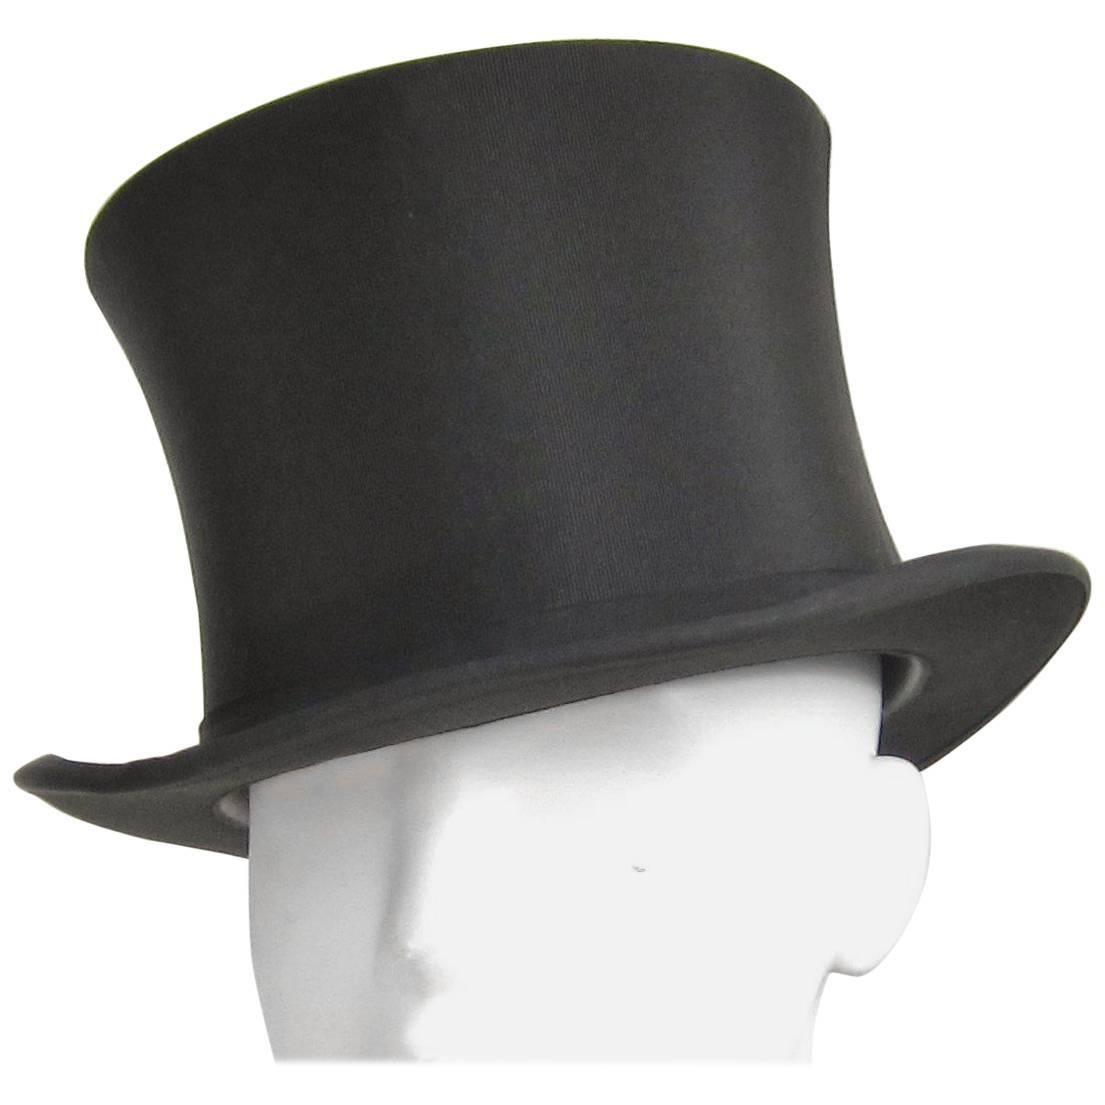 Vintage Stetson Black TOP HAT with Box 